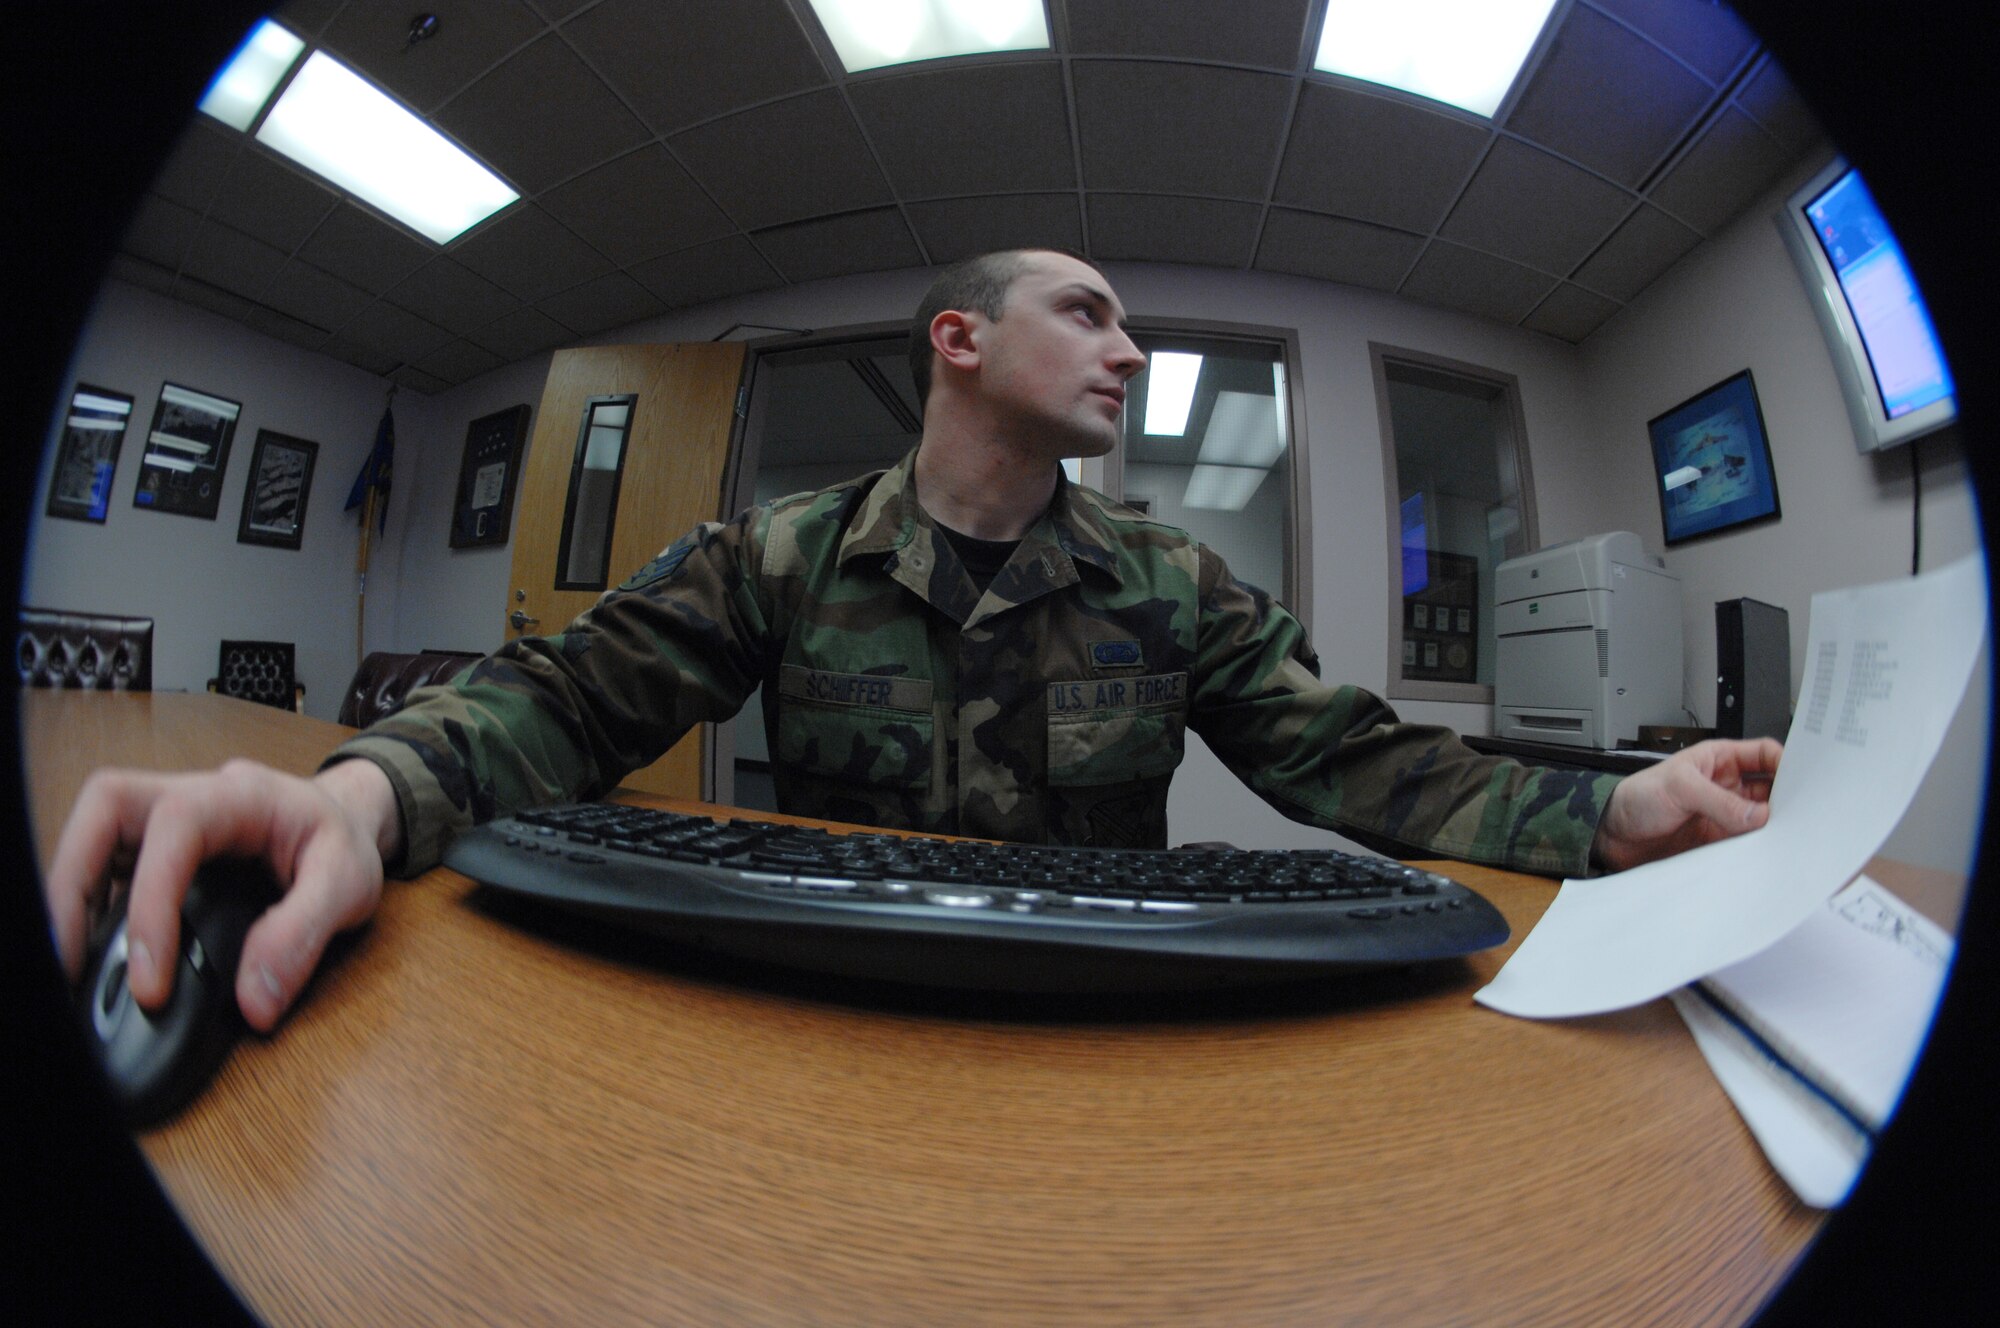 EIELSON AIR FORCE BASE, Alaska -- Senior Airman Adam Schiffer, 354th Operations Group client support administrator, changes the name of a computer from 13 to 14 characters due to the Air Force naming convention Feb. 5, 2008, at the 18th Aggressor Squadron. Airman Schiffer maintains computers in four different squadrons and as a CSA also performs tasks such as records management training and information assurance for the units they are assigned to. (U.S. Air Force photo by Airman 1st Class Christopher Griffin) 